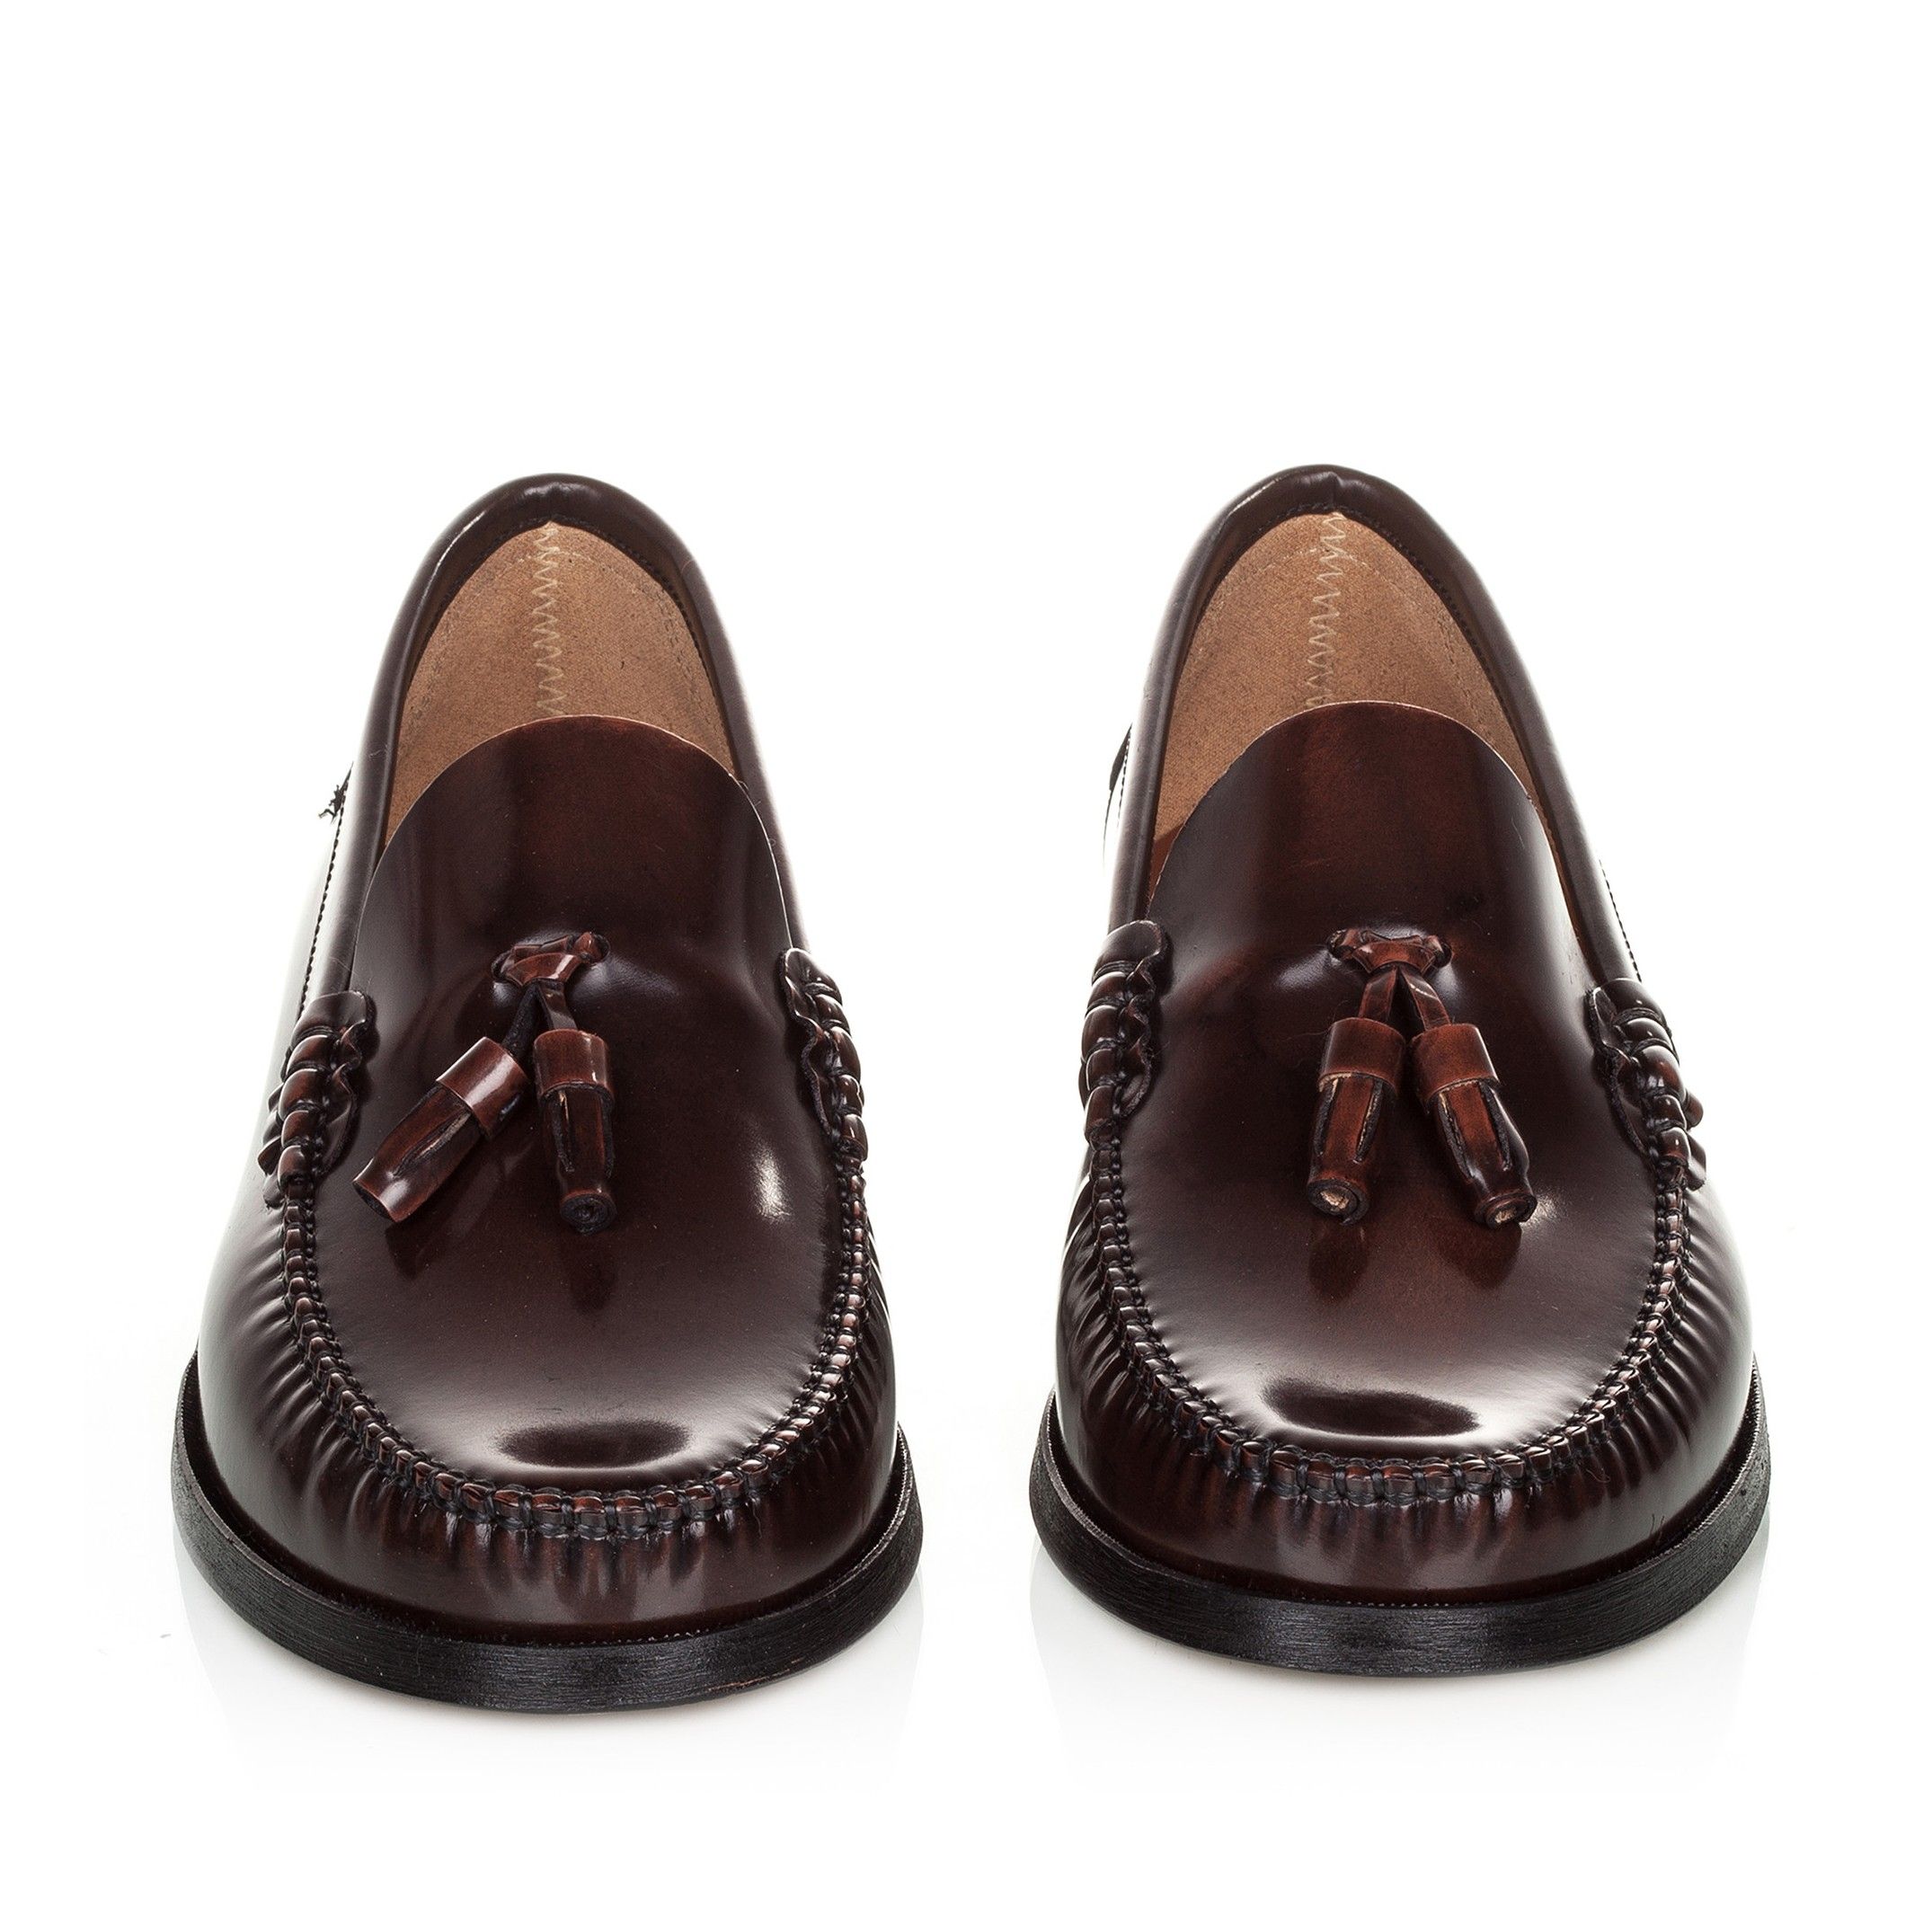 The most daring model of the classics. Leather moccasin with tassels in the center to show off in formal events and even informal ones, for example, with skinny trousers. Upper, inner and insole made of florentic leather. Leather sole sewn. Spanish product made with quality materials. In burgundy, brown and black. To dress in summer and winter.